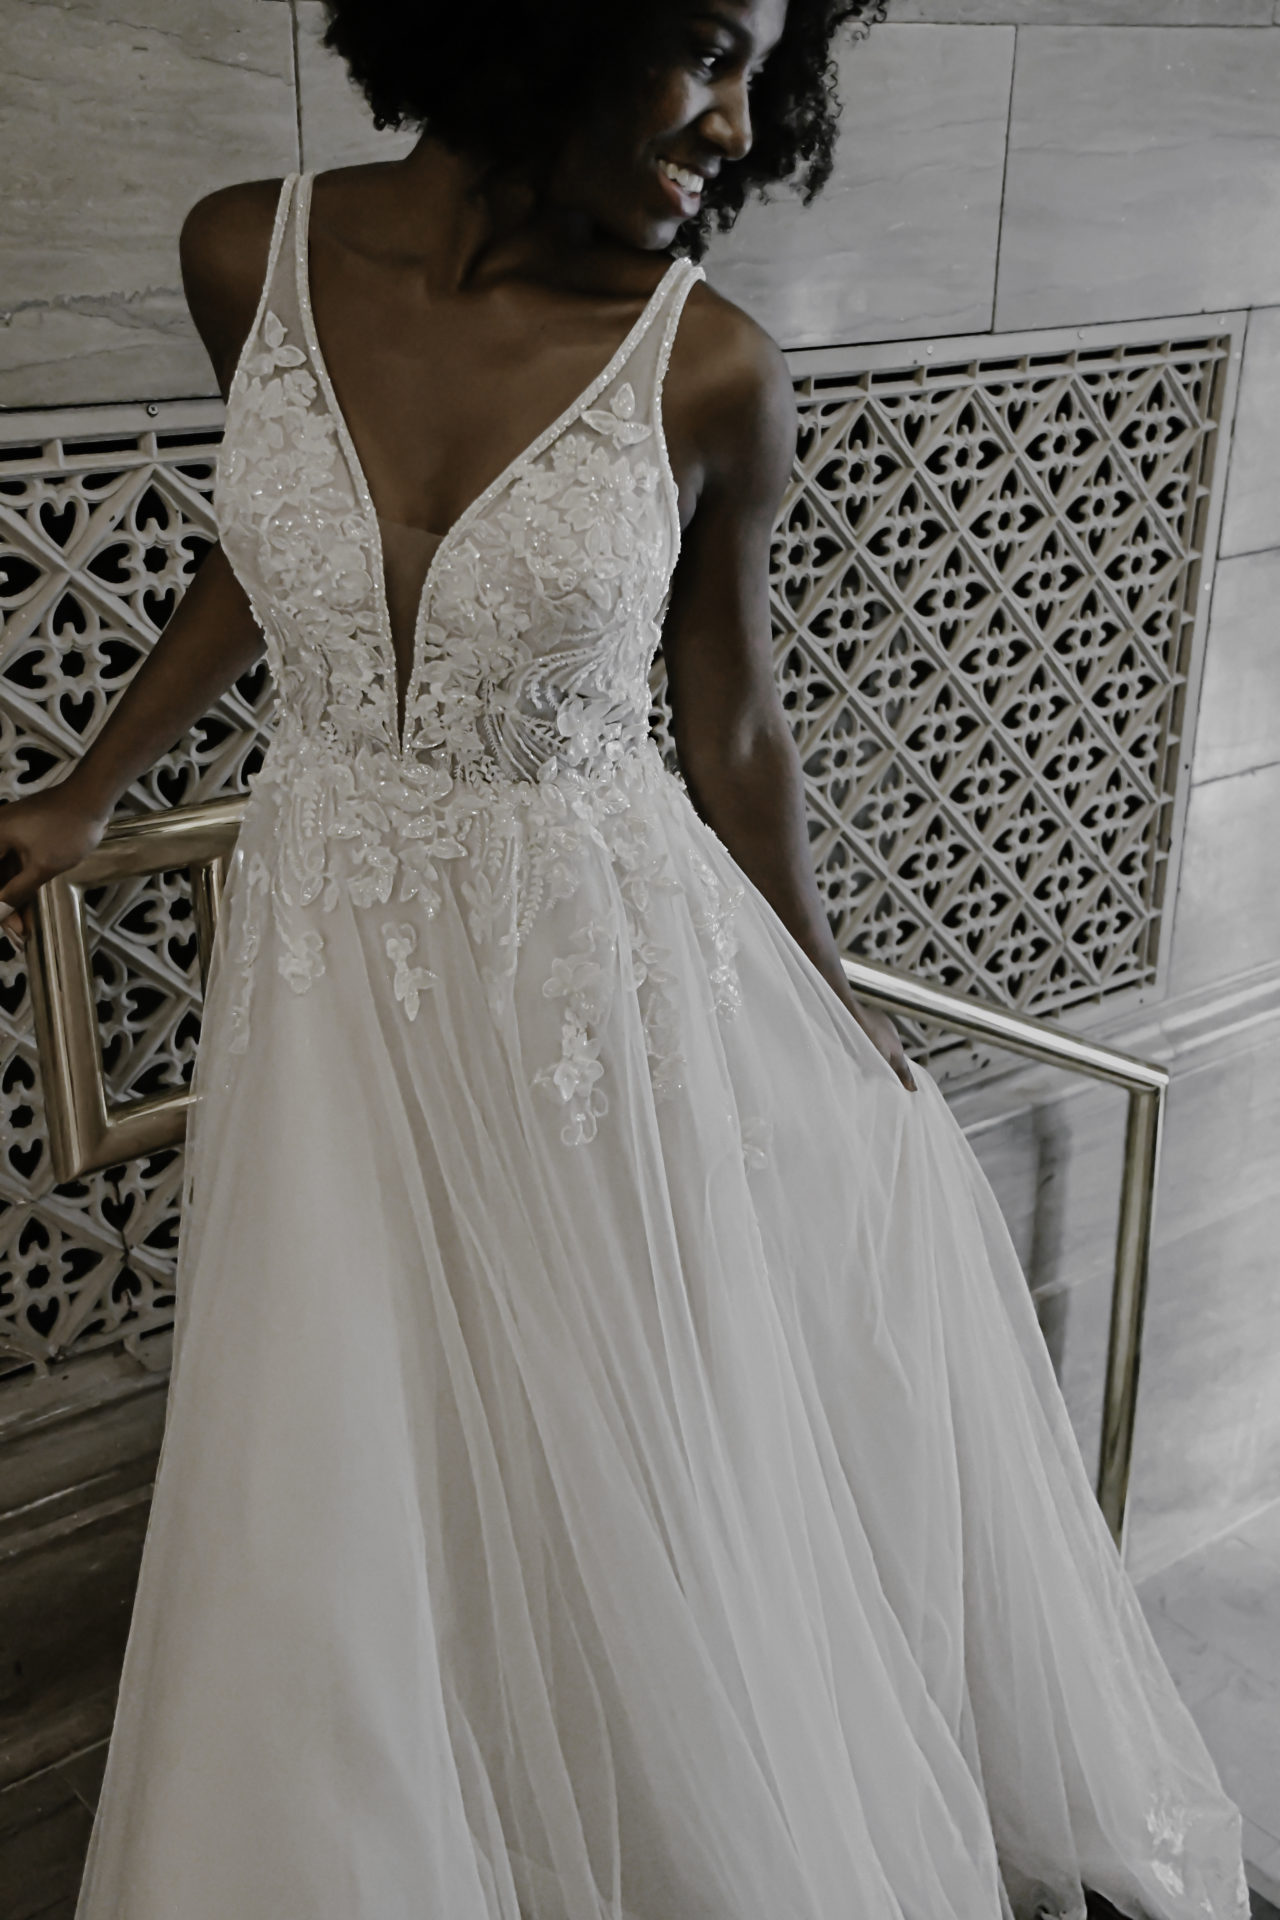 Oneshoulder wedding dress with asymmetrical floral embroidery